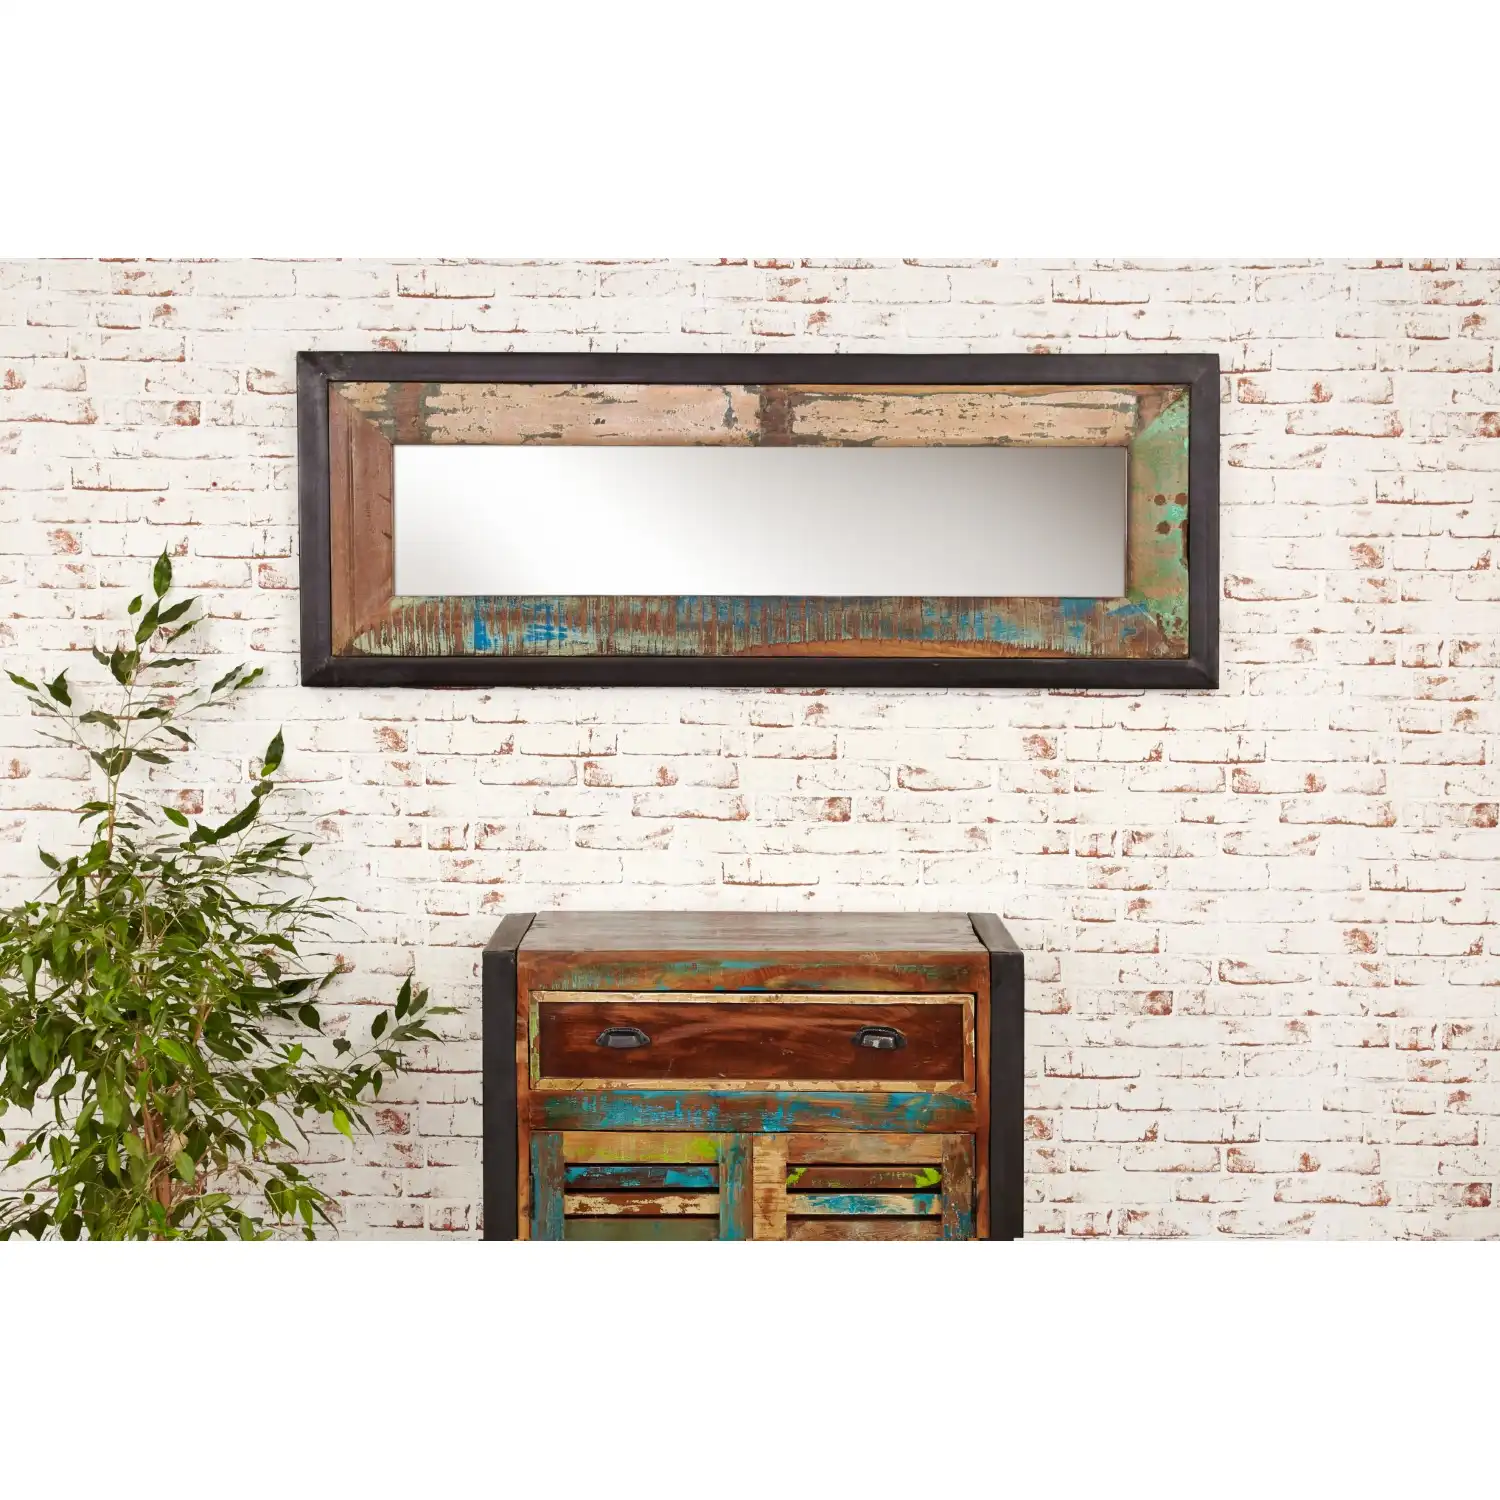 Large Rustic Painted Wall Mirror Reclaimed Rectangular